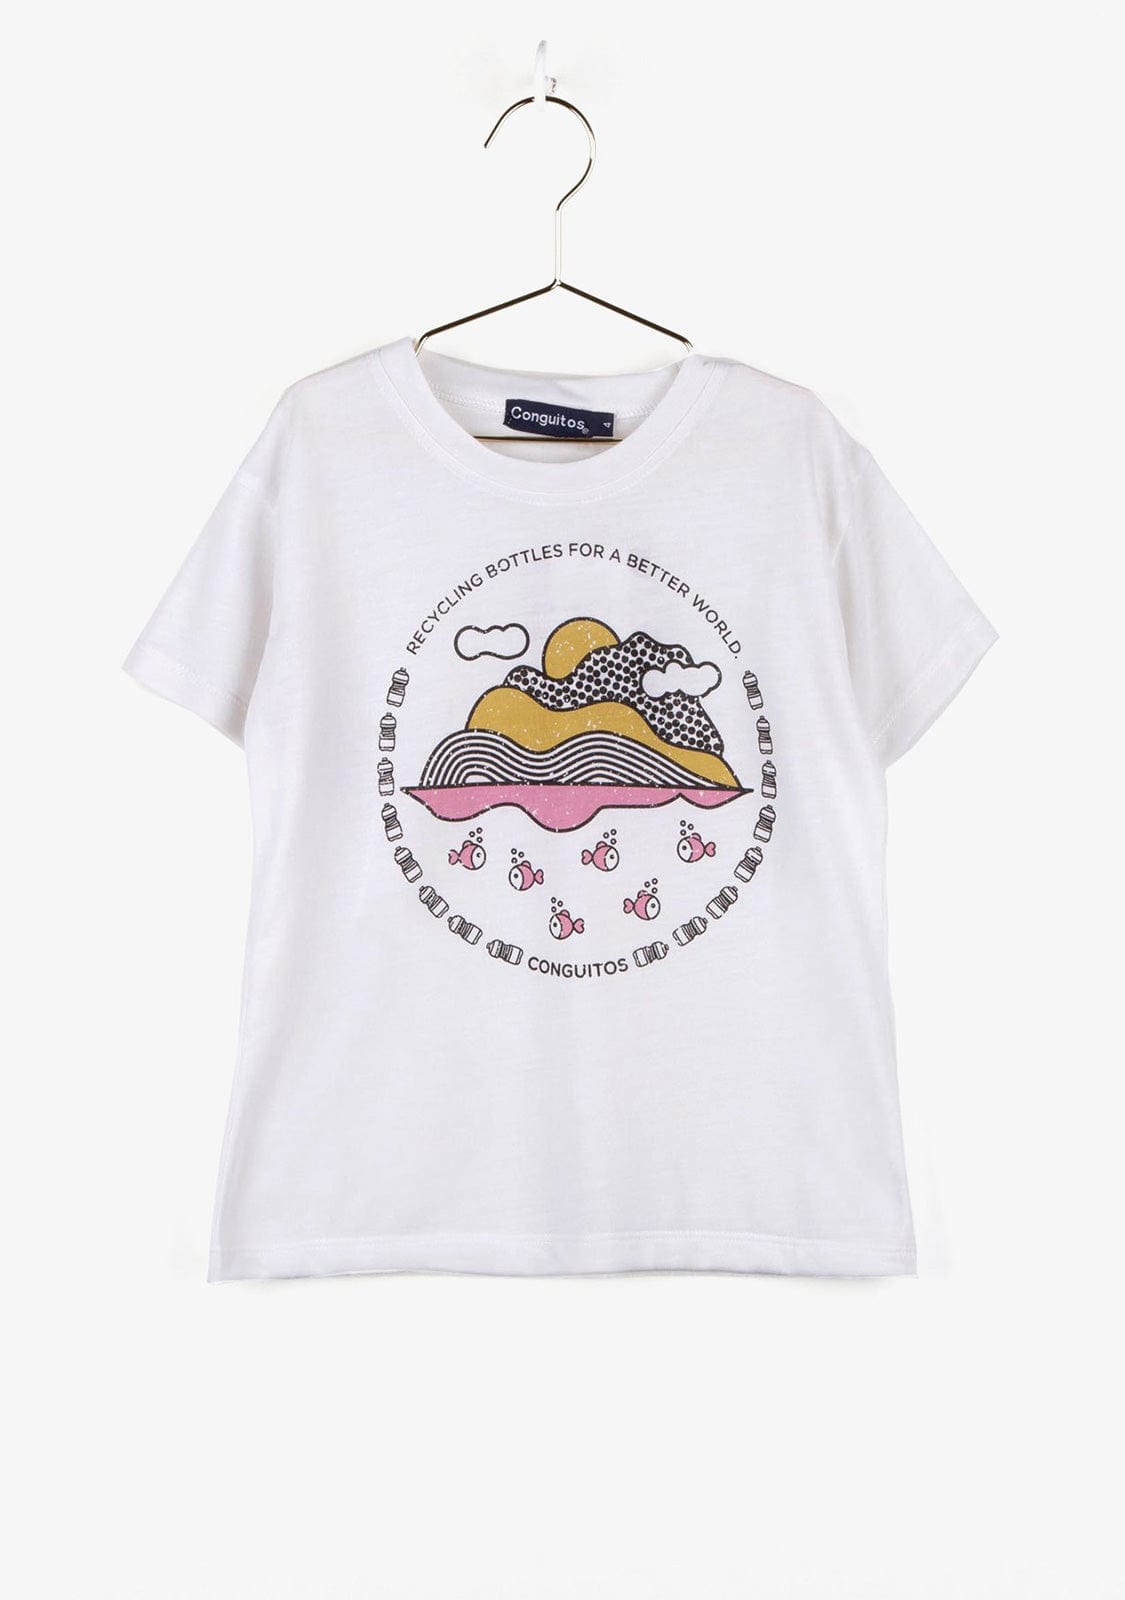 CONGUITOS TEXTIL Clothing Girl's "Recycling" T-Shirt